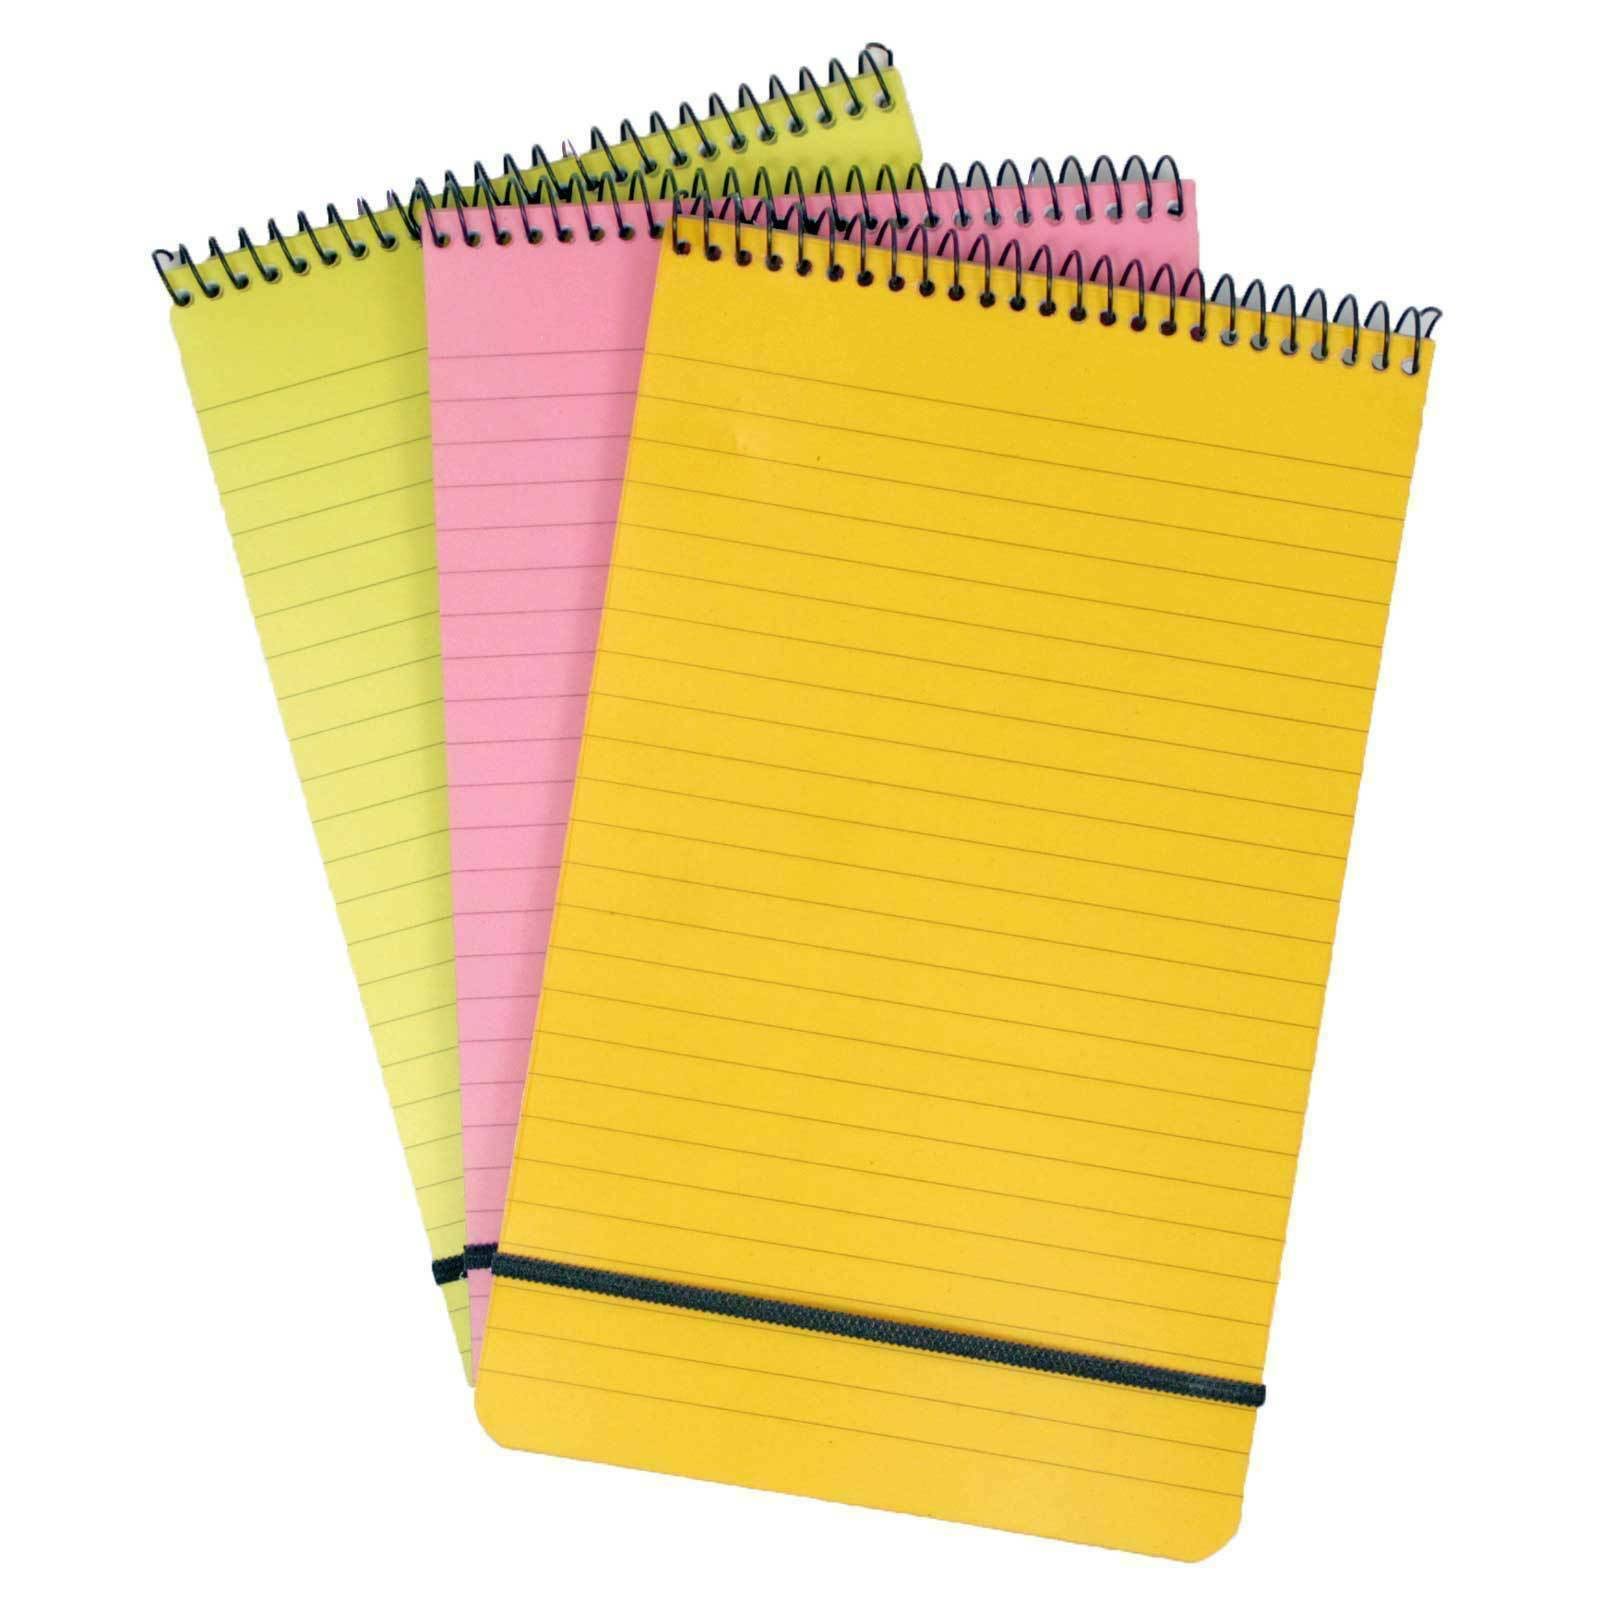 Neon Notebooks - Pack of 3